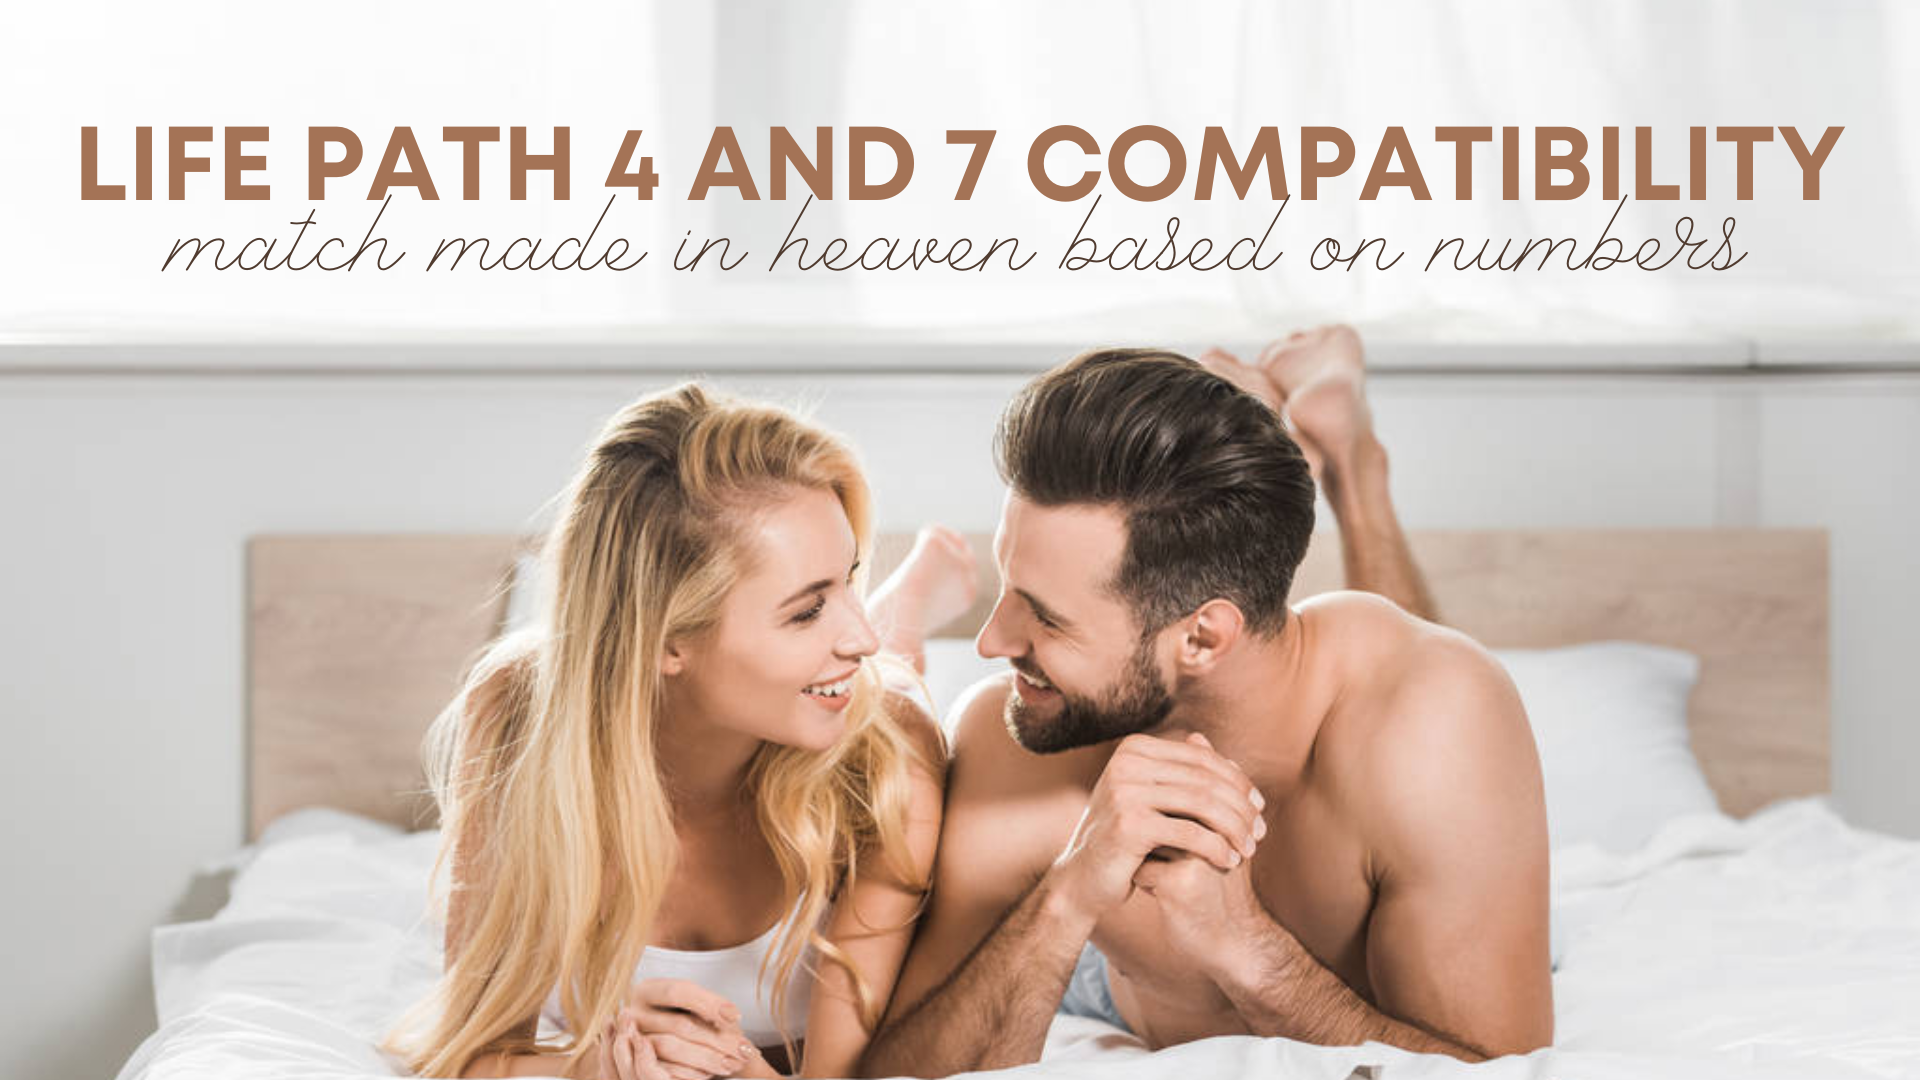 Life Path 4 And 7 Compatibility - Match Made In Heaven Based On Numbers